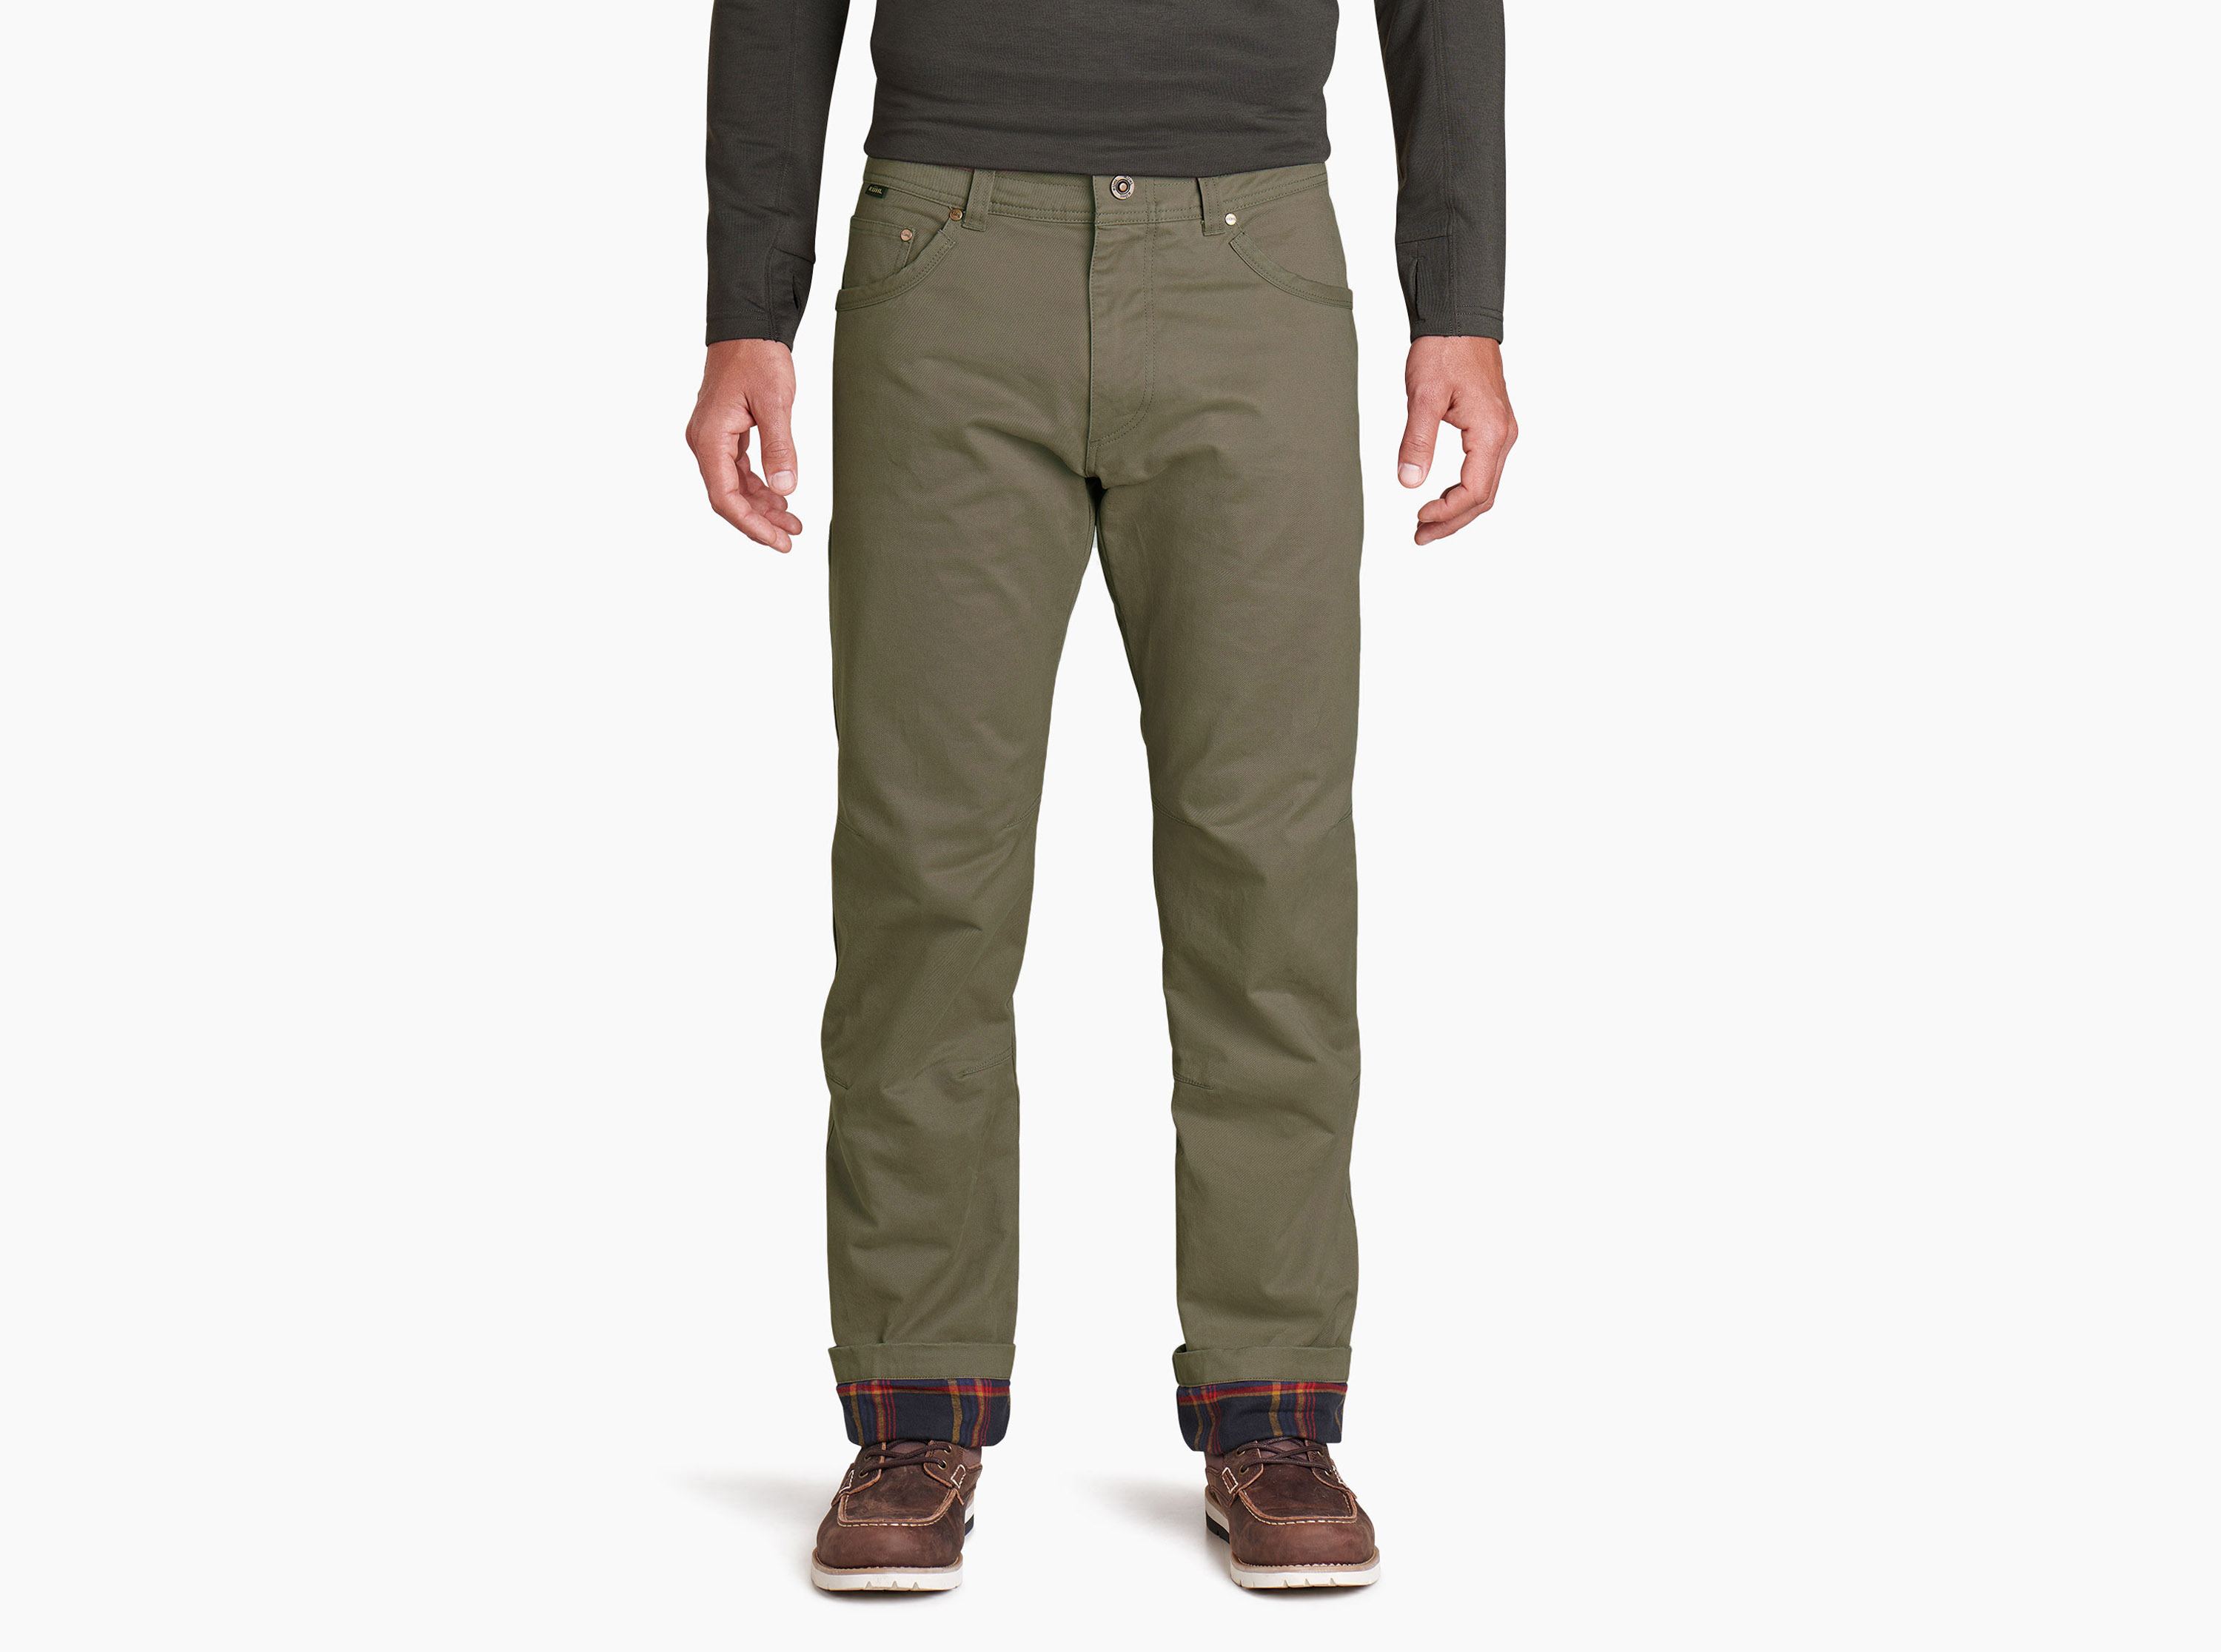 Kuhl Rydr Pant 30 Inseam - Men's - Apex Outfitter & Board Co